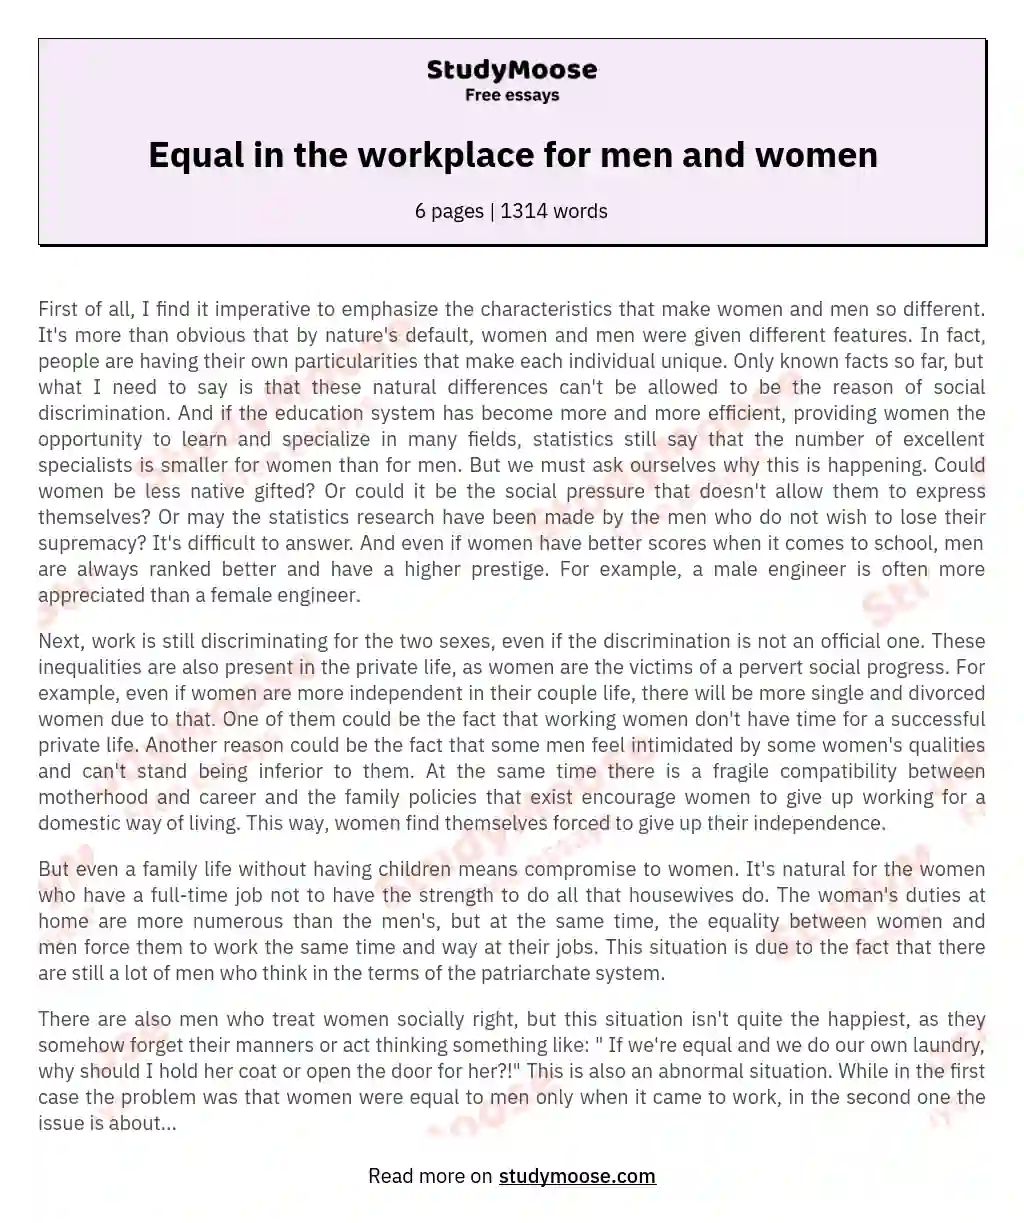 Equal in the workplace for men and women essay